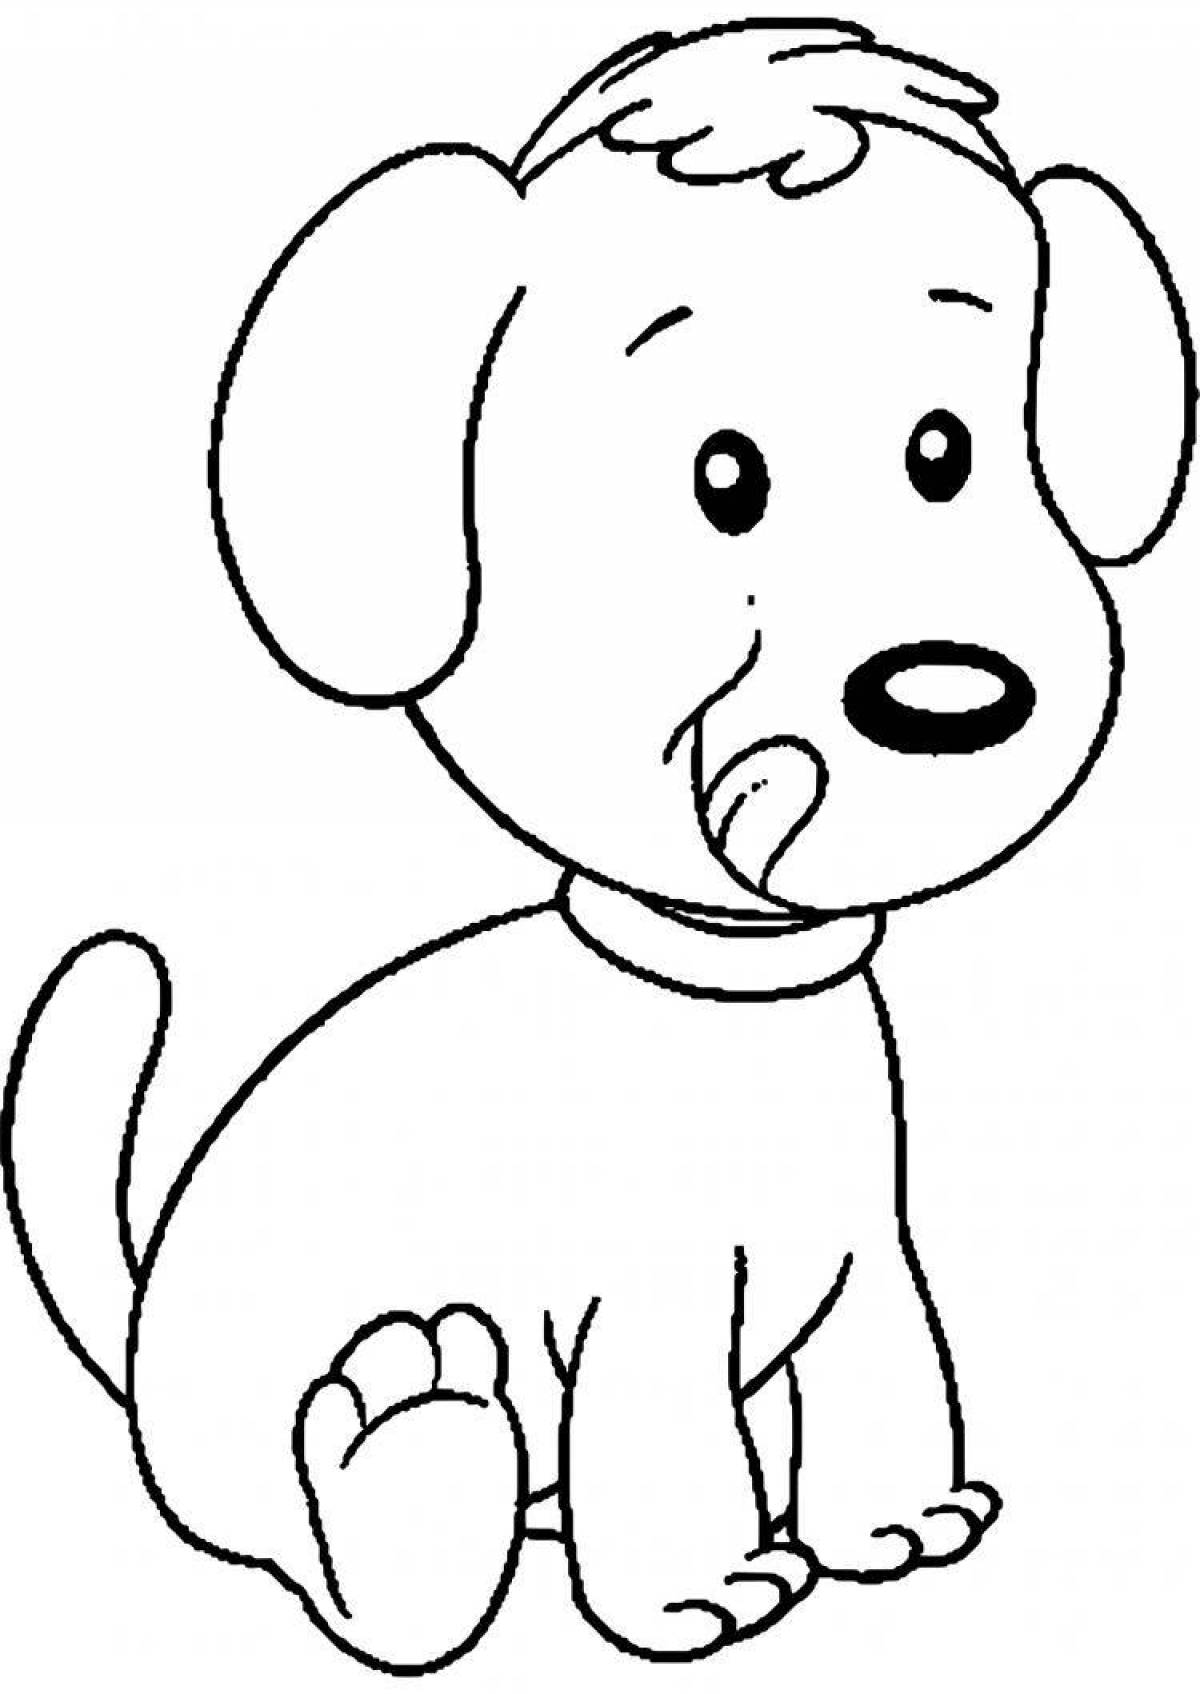 Wiggly coloring page dog for kids